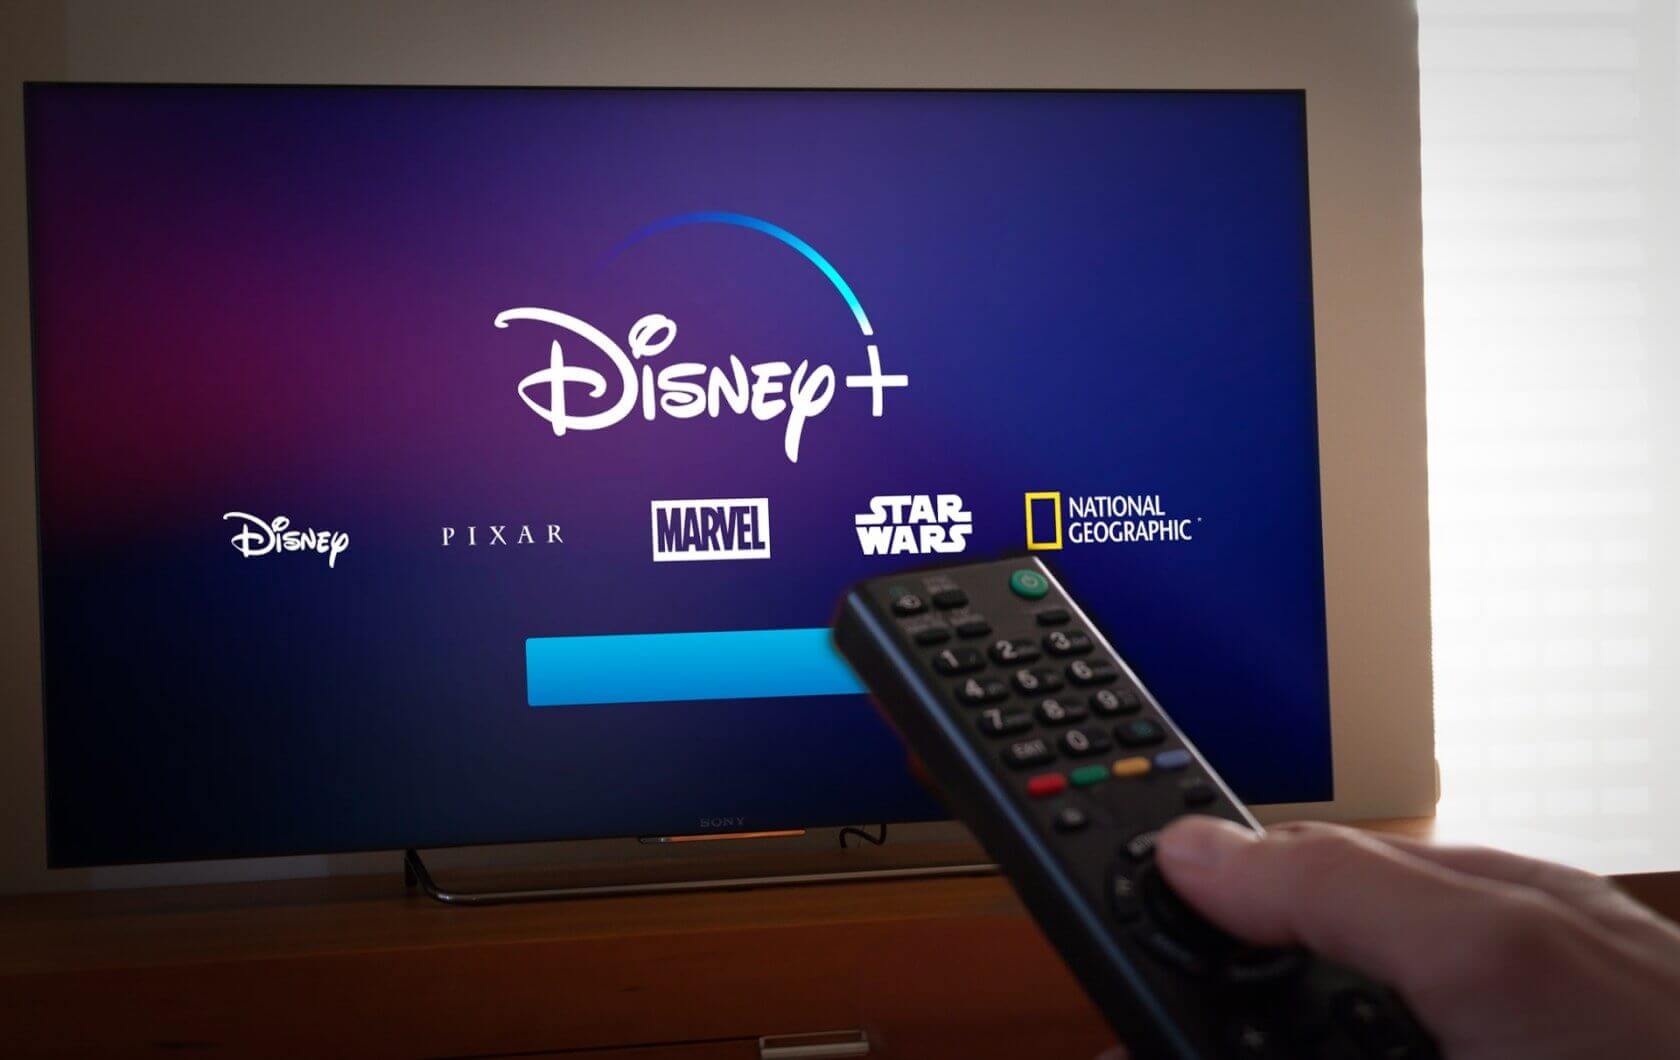 Streaming services like Disney+ see significant uptick in new users